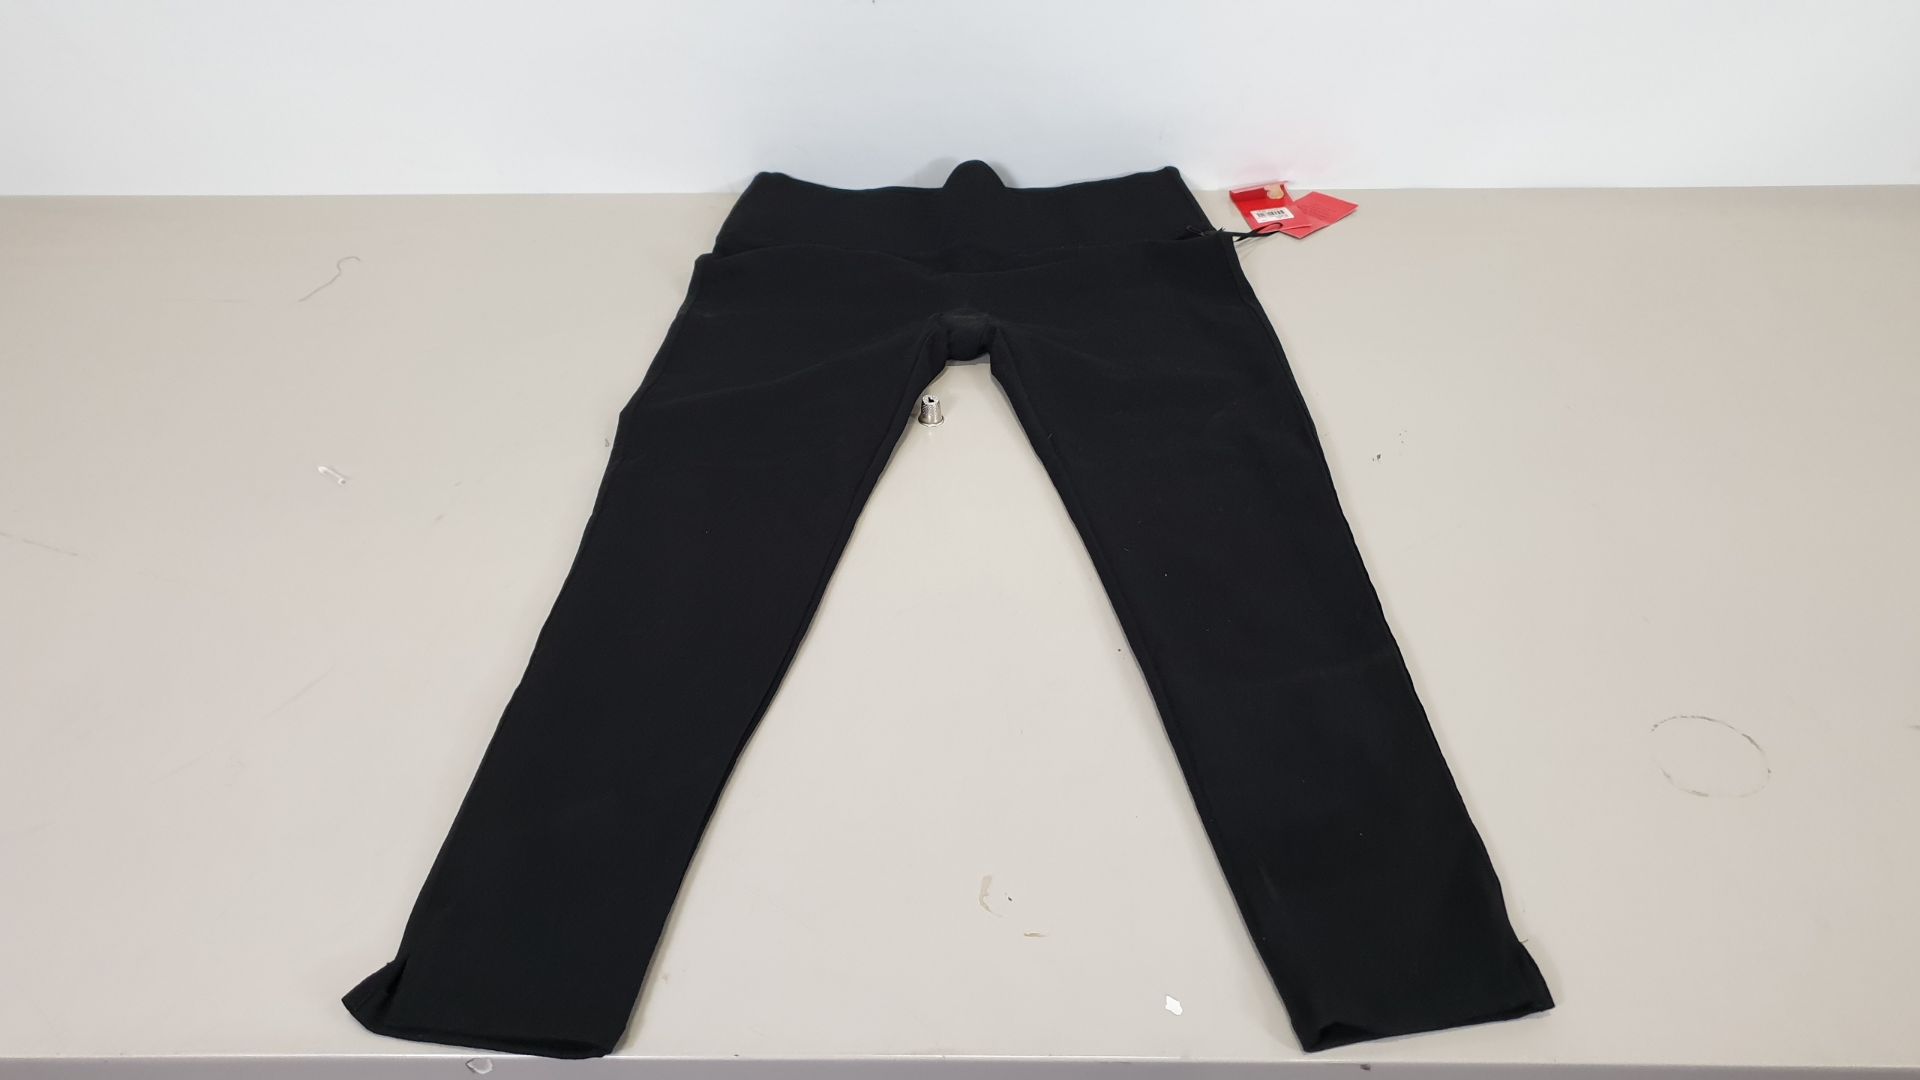 10 X BRAND NEW SPANX BLACK STRUCTURED LEGGINGS SIZE XL RRP $920.00